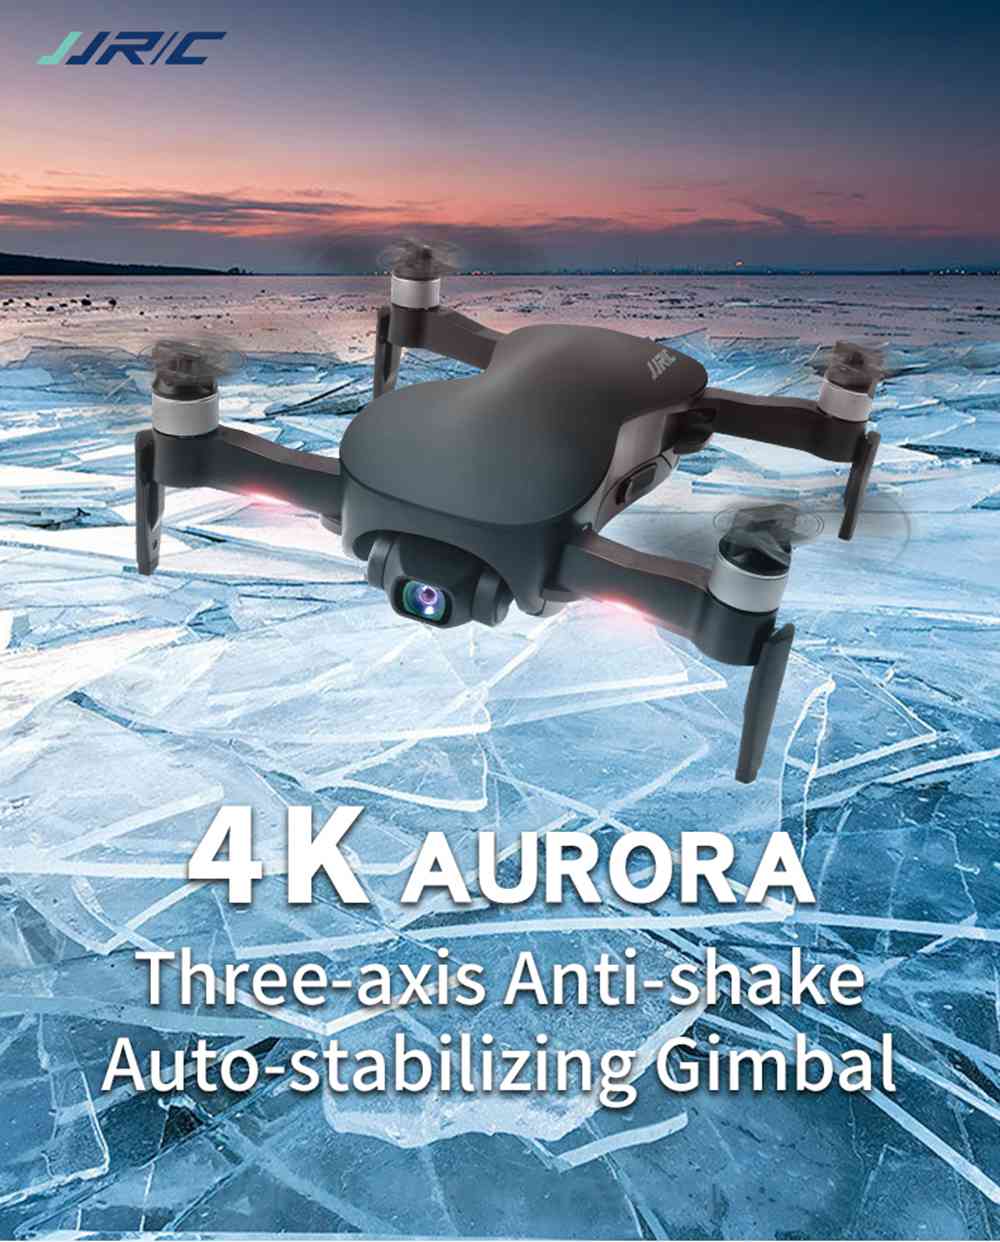 JJRC X12 AURORA 4K 5G WIFI 1.2km FPV GPS Foldable RC Drone With 3Axis Gimbal 50X Digital Zoom Ultrasonic Positioning RTF - White One Battery